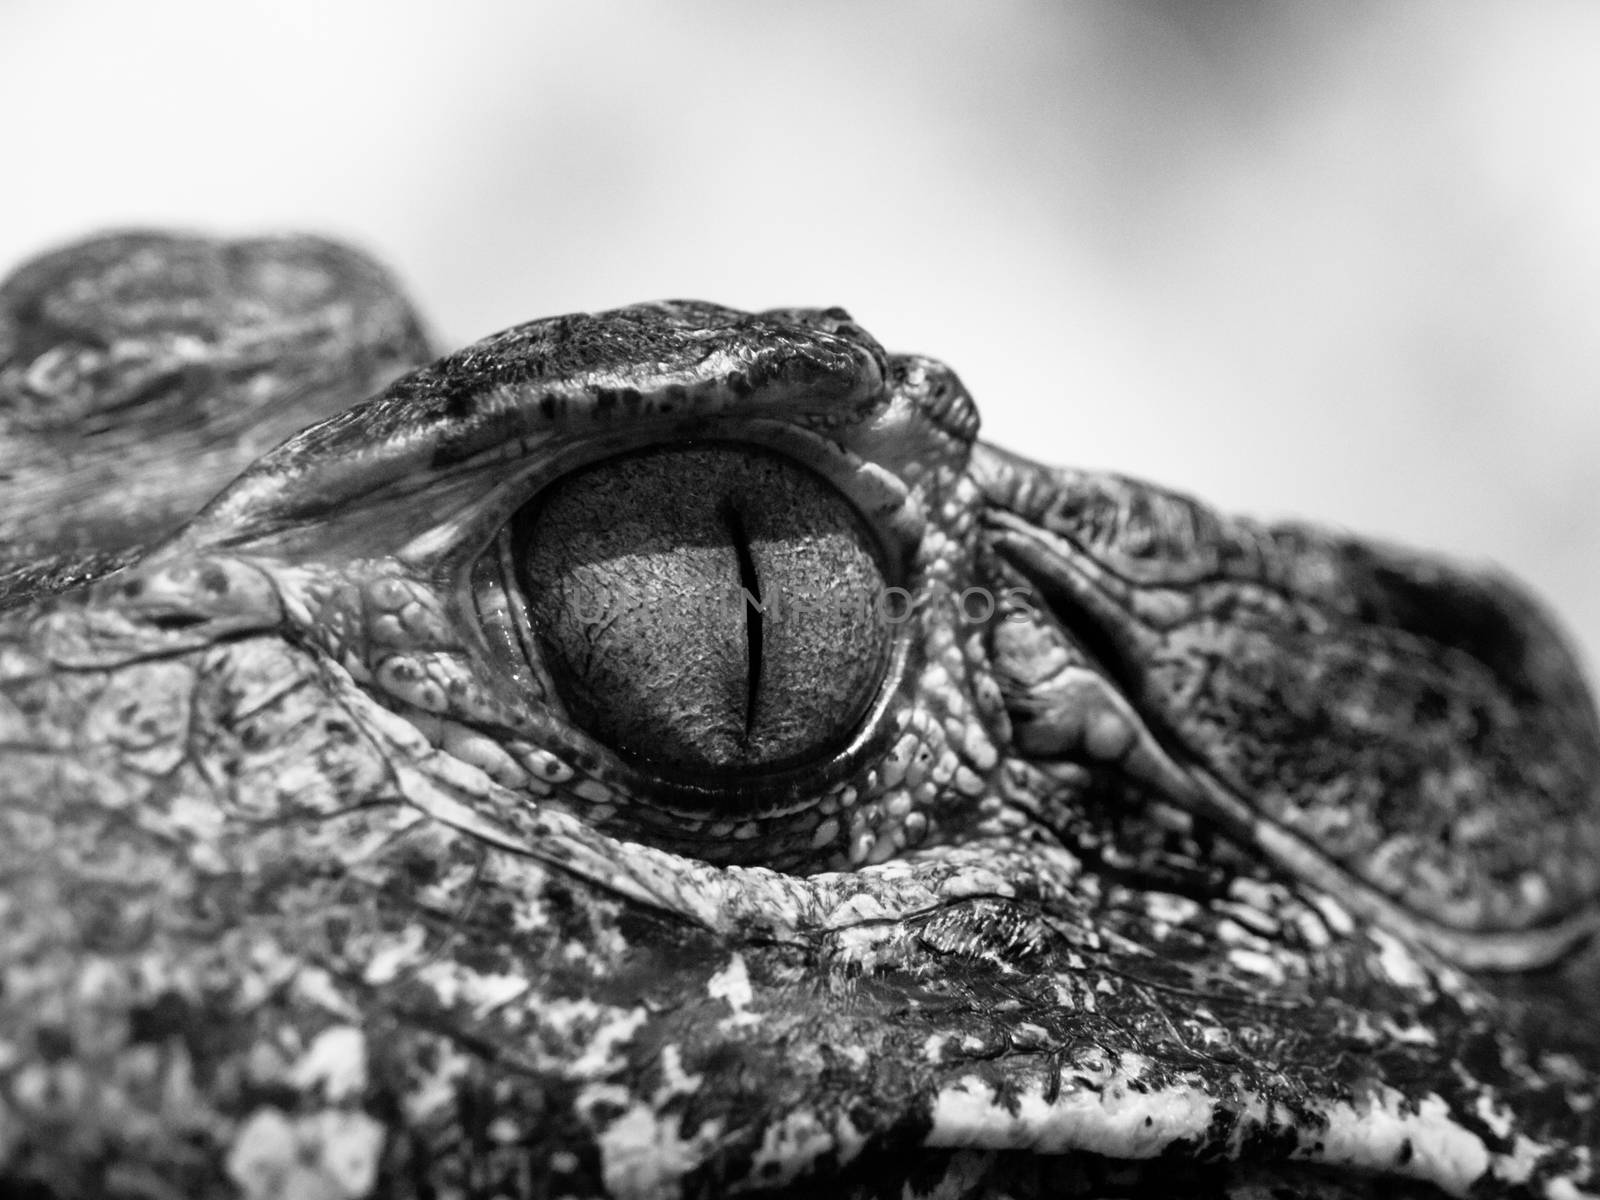 Eye of caiman in close-up view. Black and white image by pyty